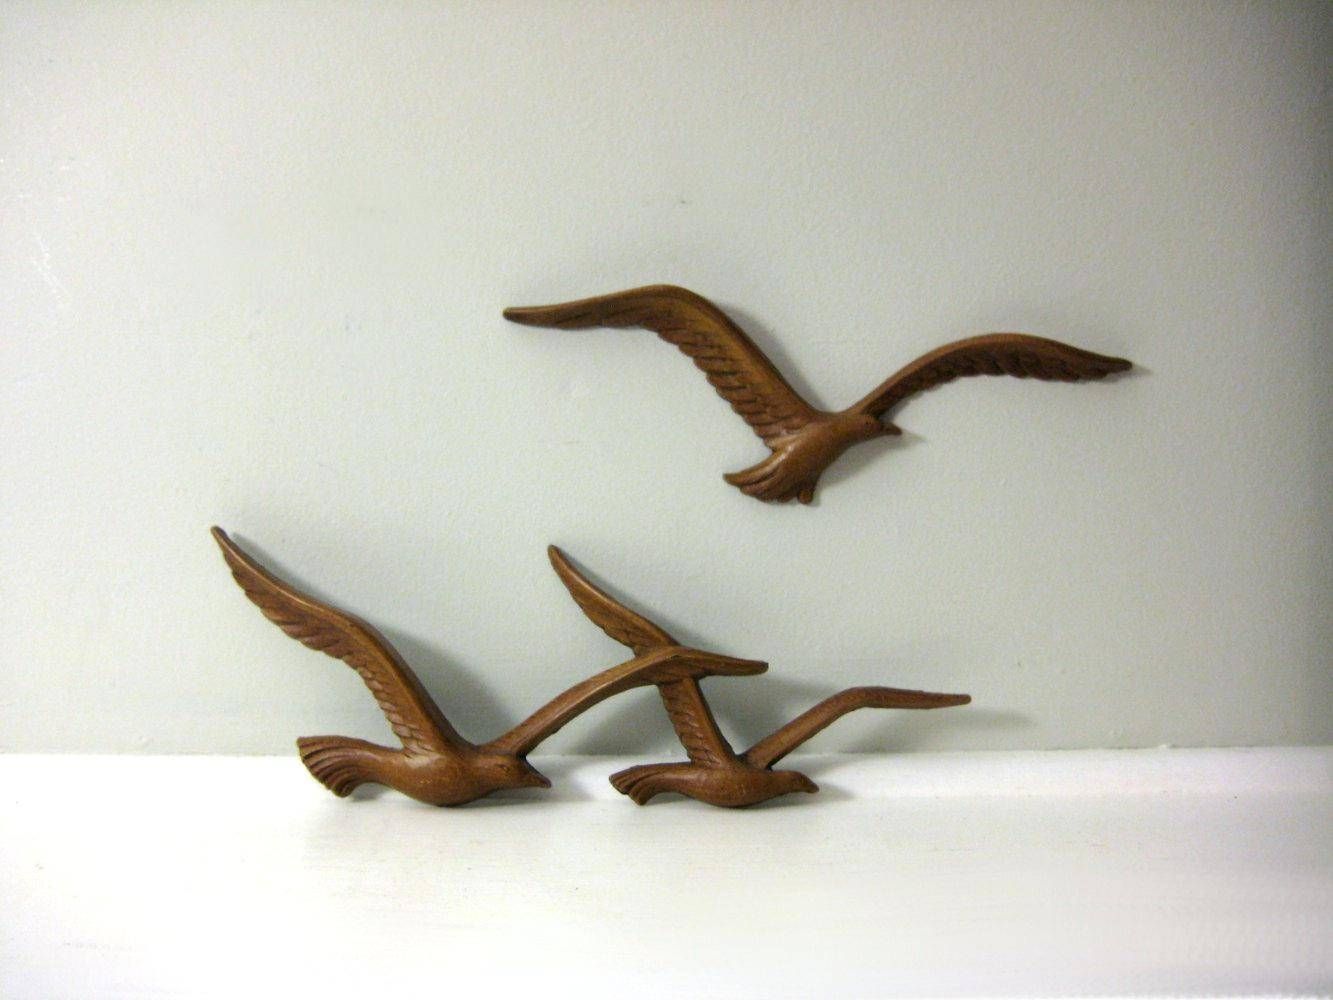 Wall Ideas : Birds In Flight Wall Daccor Loading Zoom Bird Panels Intended For Latest Target Bird Wall Decor (View 6 of 30)